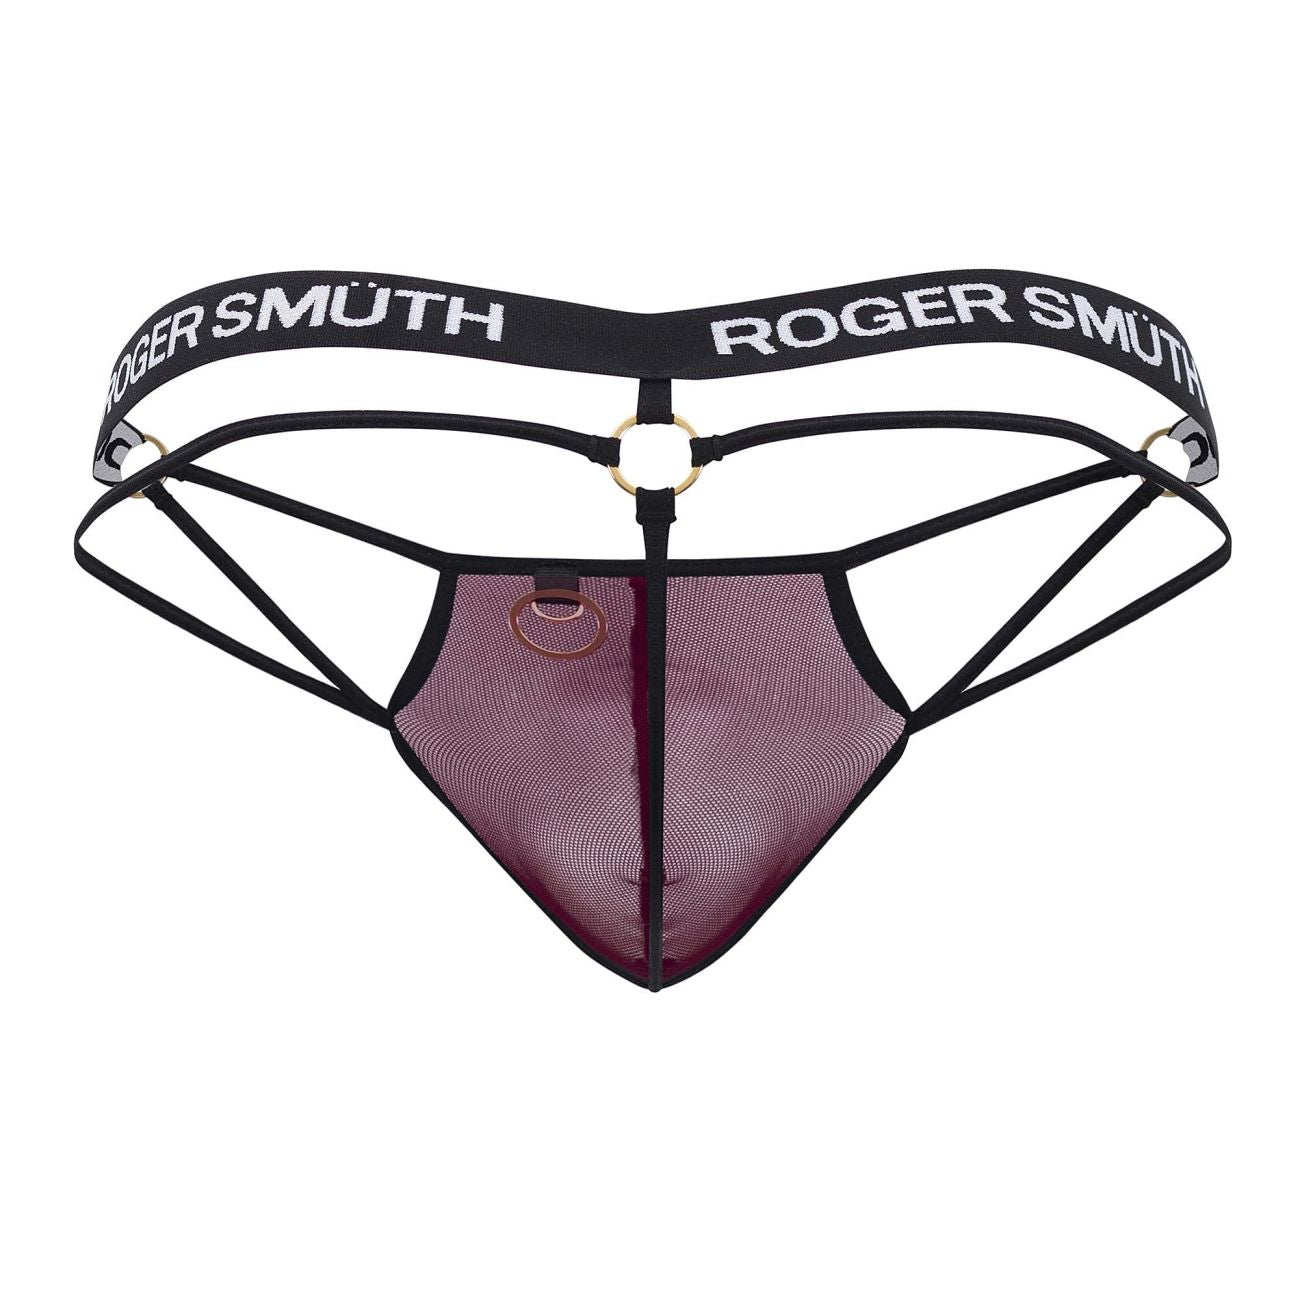 Roger Smuth RS073 G-String